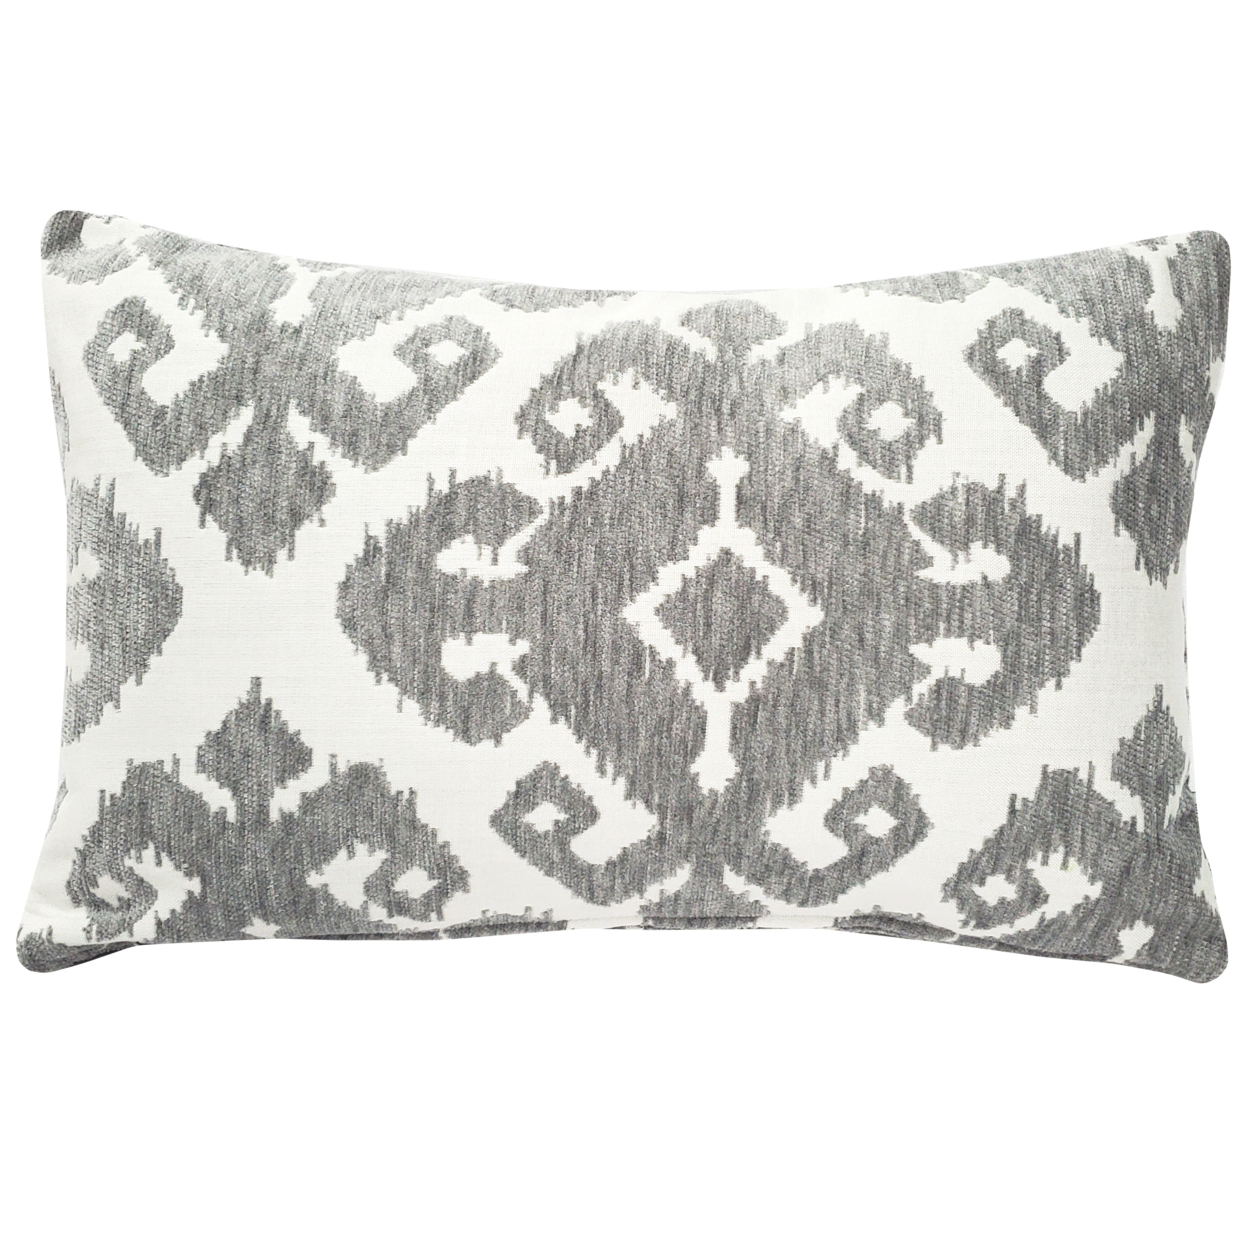 Insignia Gray Outdoor Throw Pillow 12x19, With Polyfill Insert